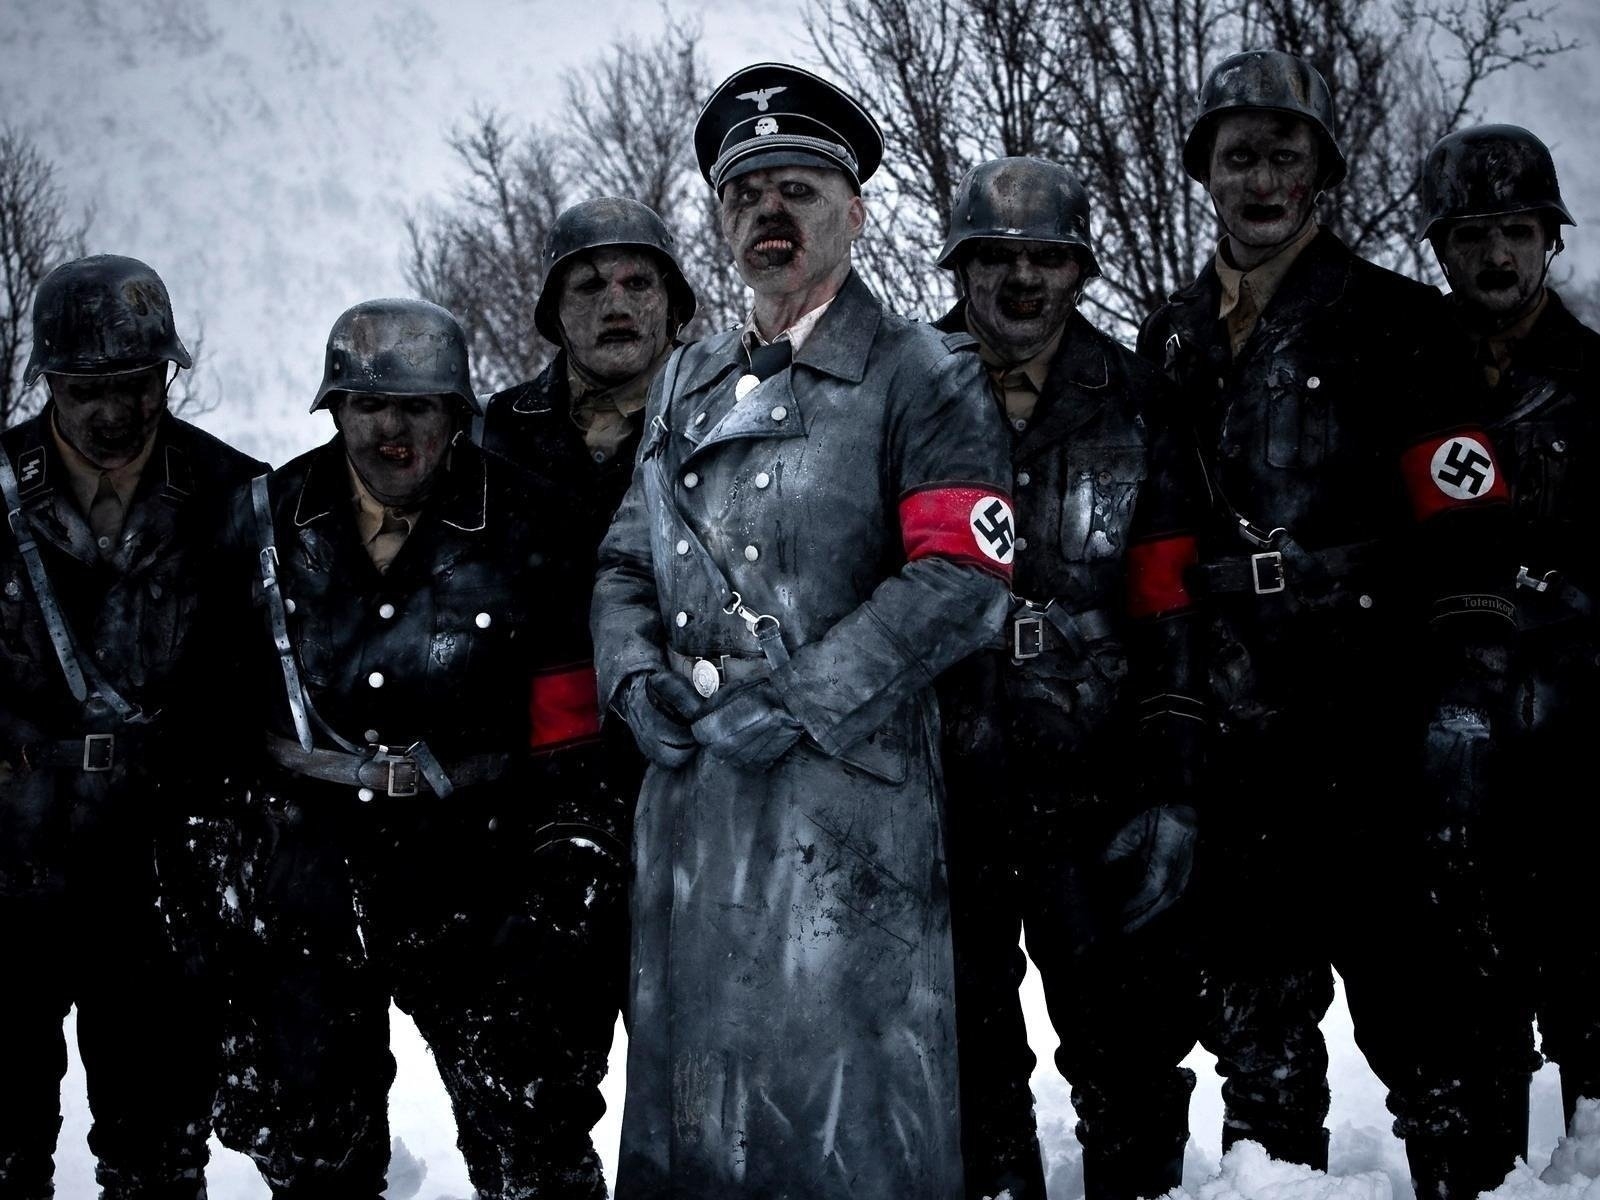 Hd Wallpapers Epic Space Wallpaper Dead Snow Nazi Zombie 1600 10 Wallpaper The Balkans Chronicles